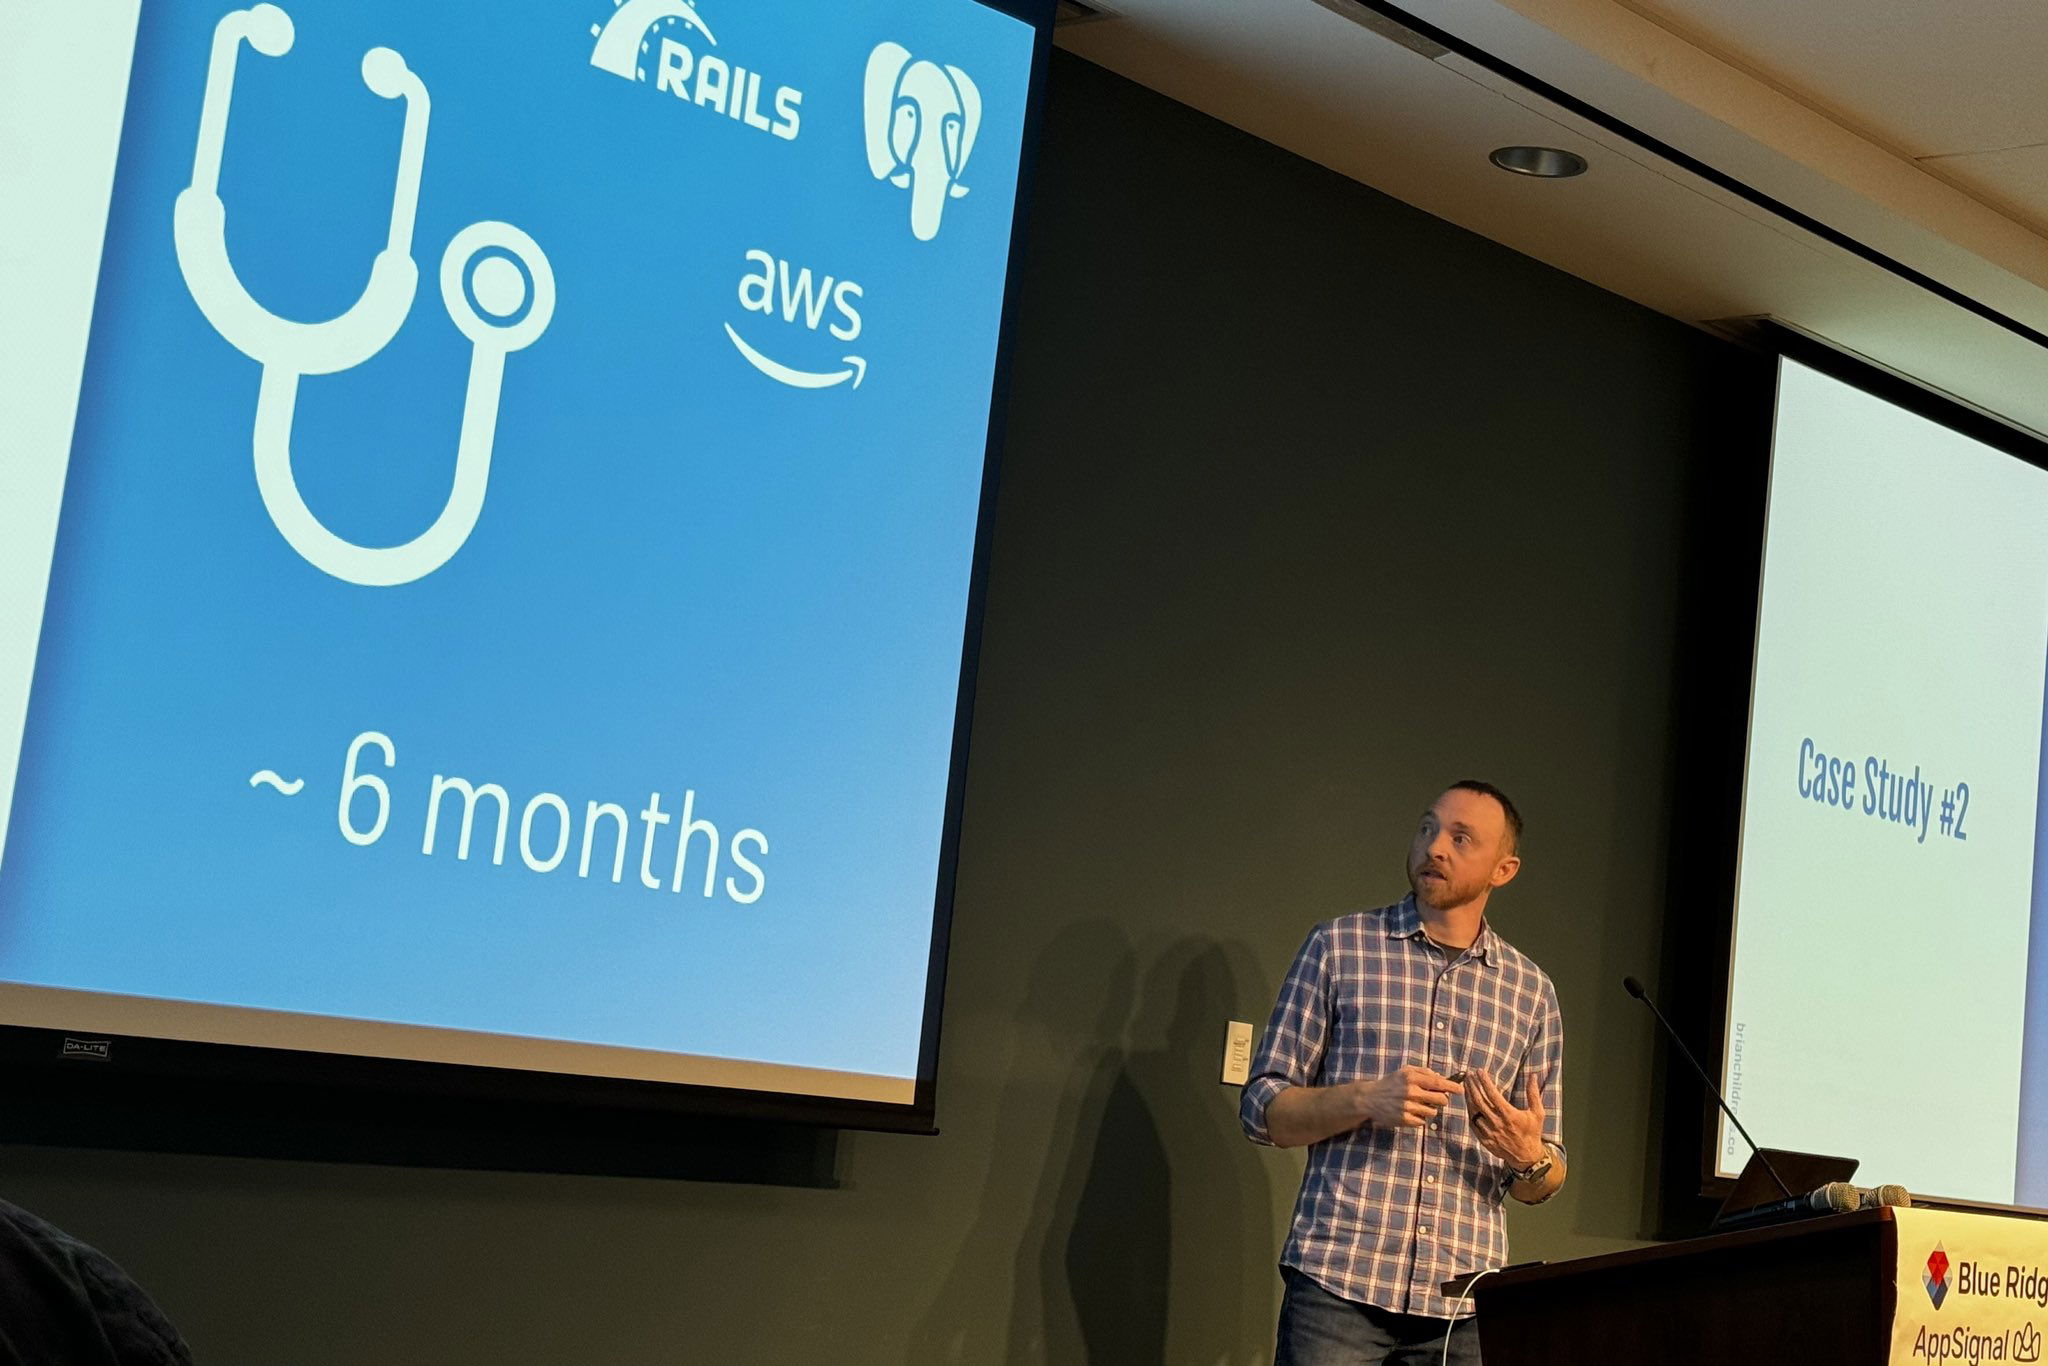 Presenter at a conference discussing a case study related to Rails and AWS, indicated by icons on a slide that reads “~ 6 months”, standing beside a podium with a Blue Ridge Ruby conference banner.